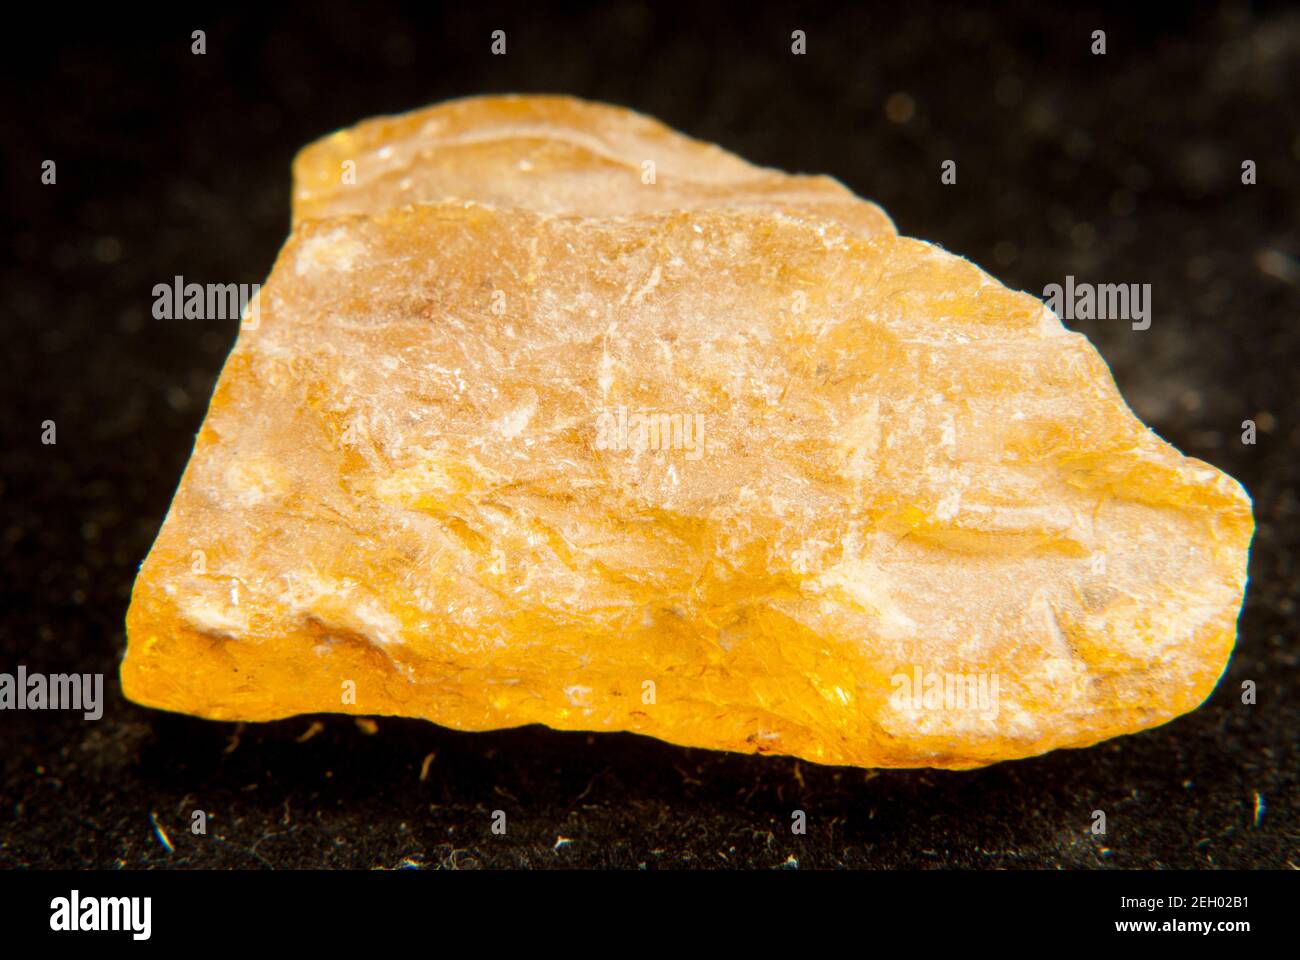 Closeup shot of Copaline mineral isolated on a black background Stock Photo